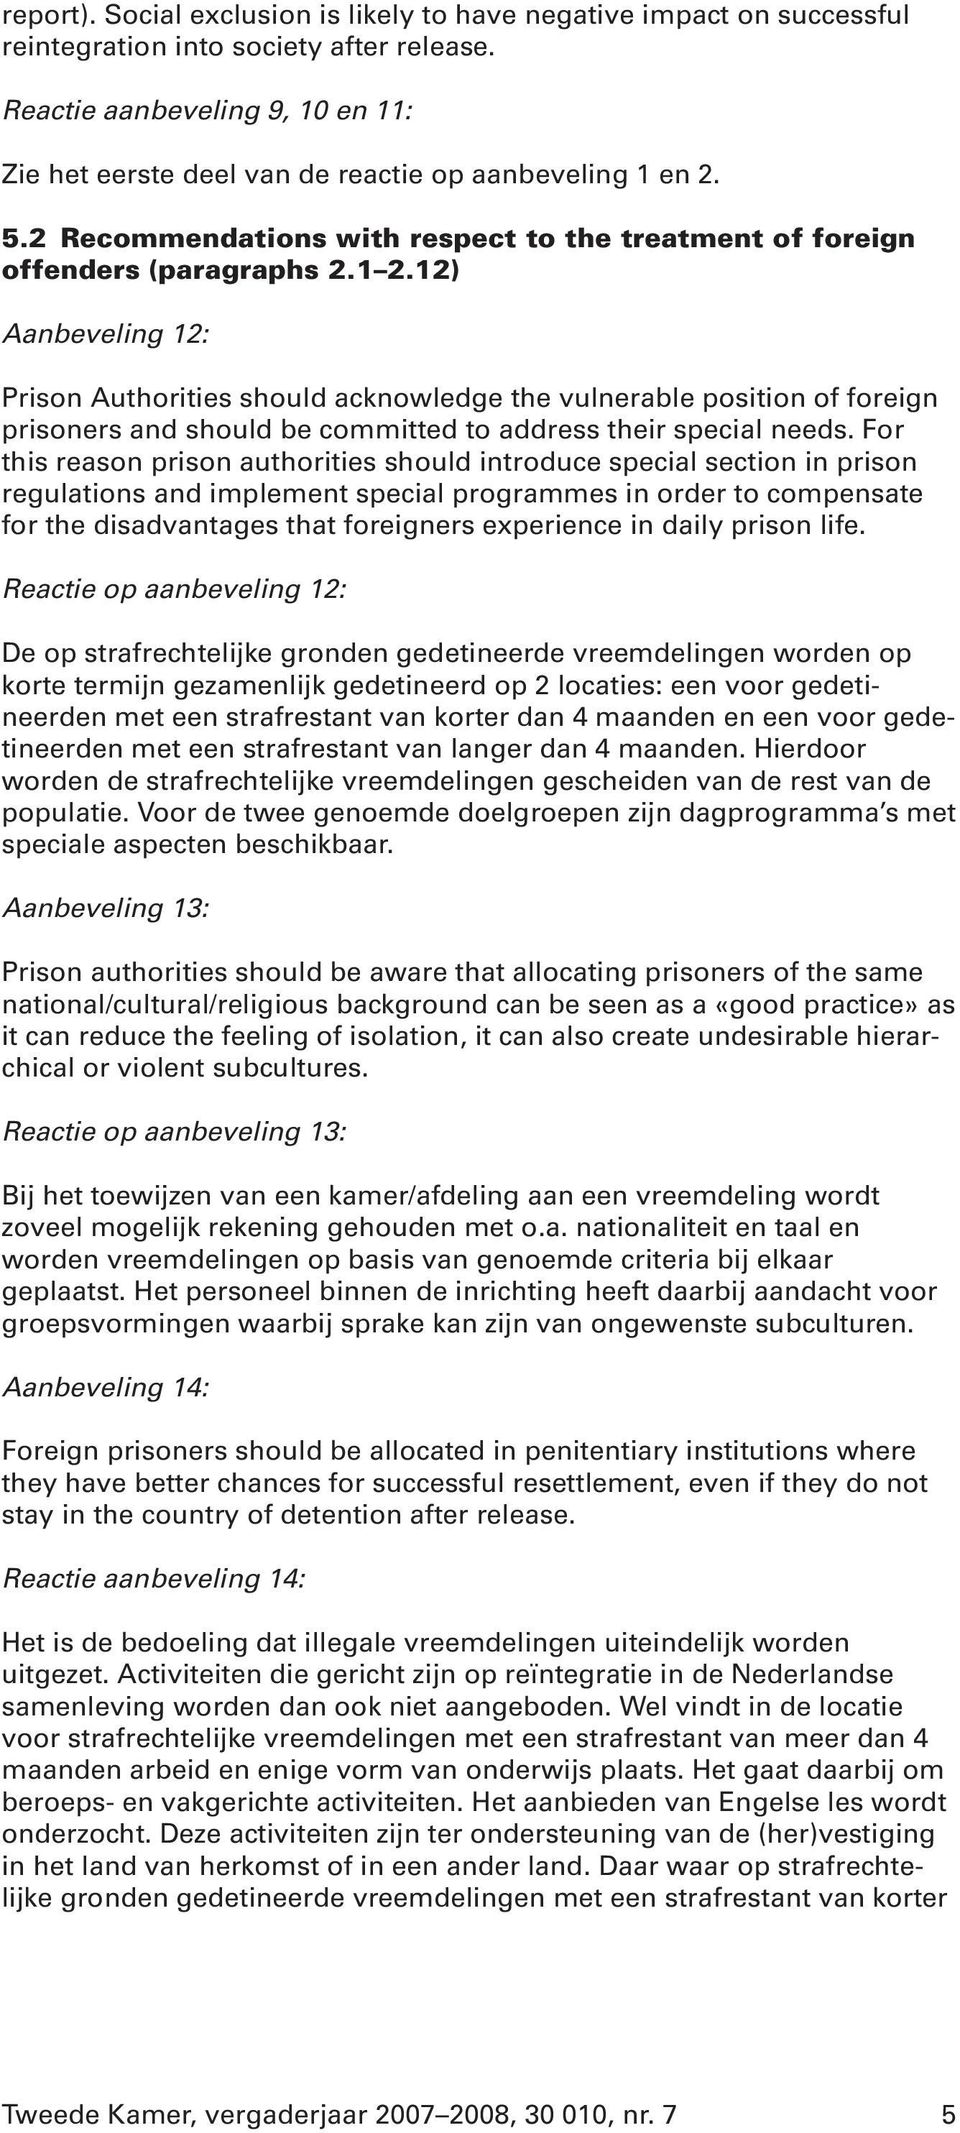 12) Aanbeveling 12: Prison Authorities should acknowledge the vulnerable position of foreign prisoners and should be committed to address their special needs.